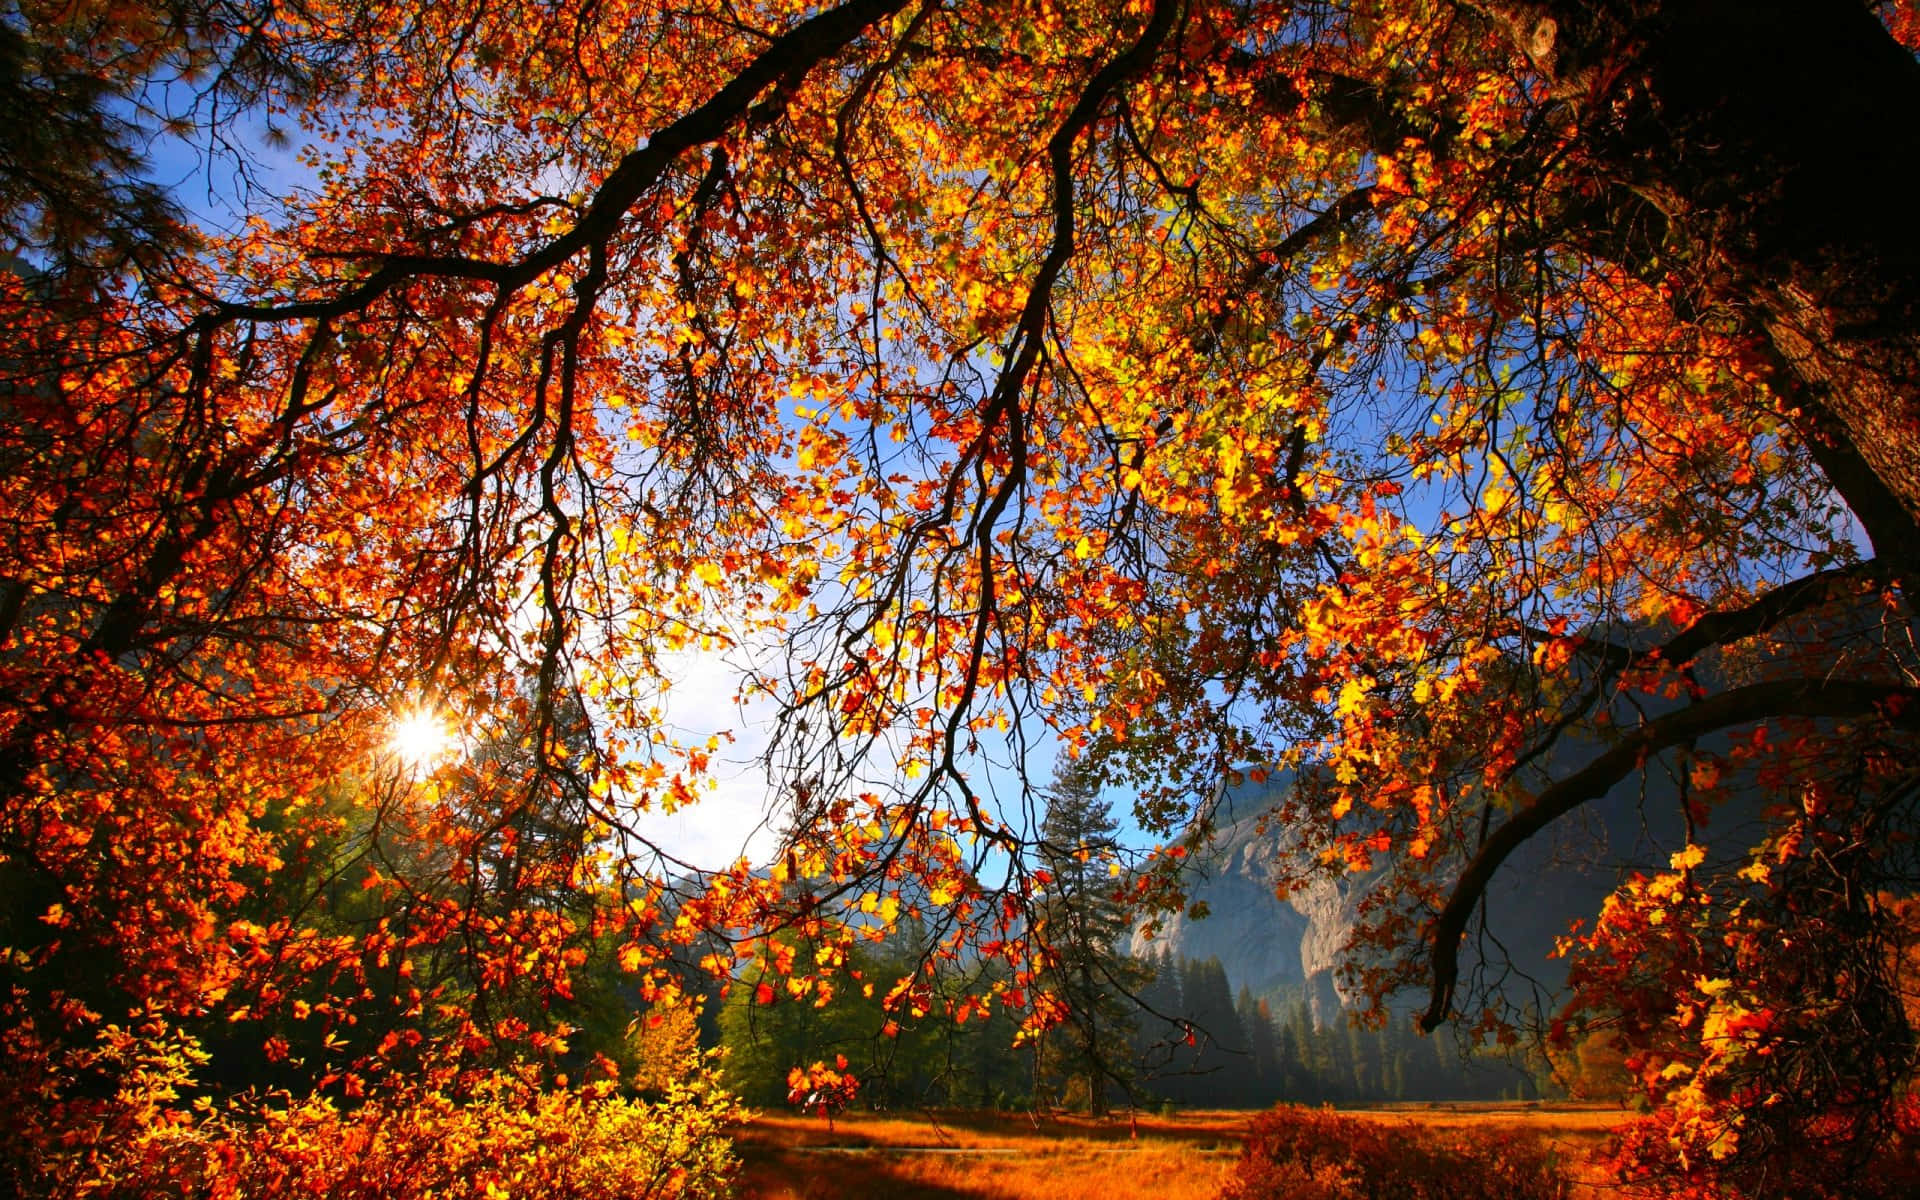 Enjoy the beauty of fall with the golden hues of autumn.